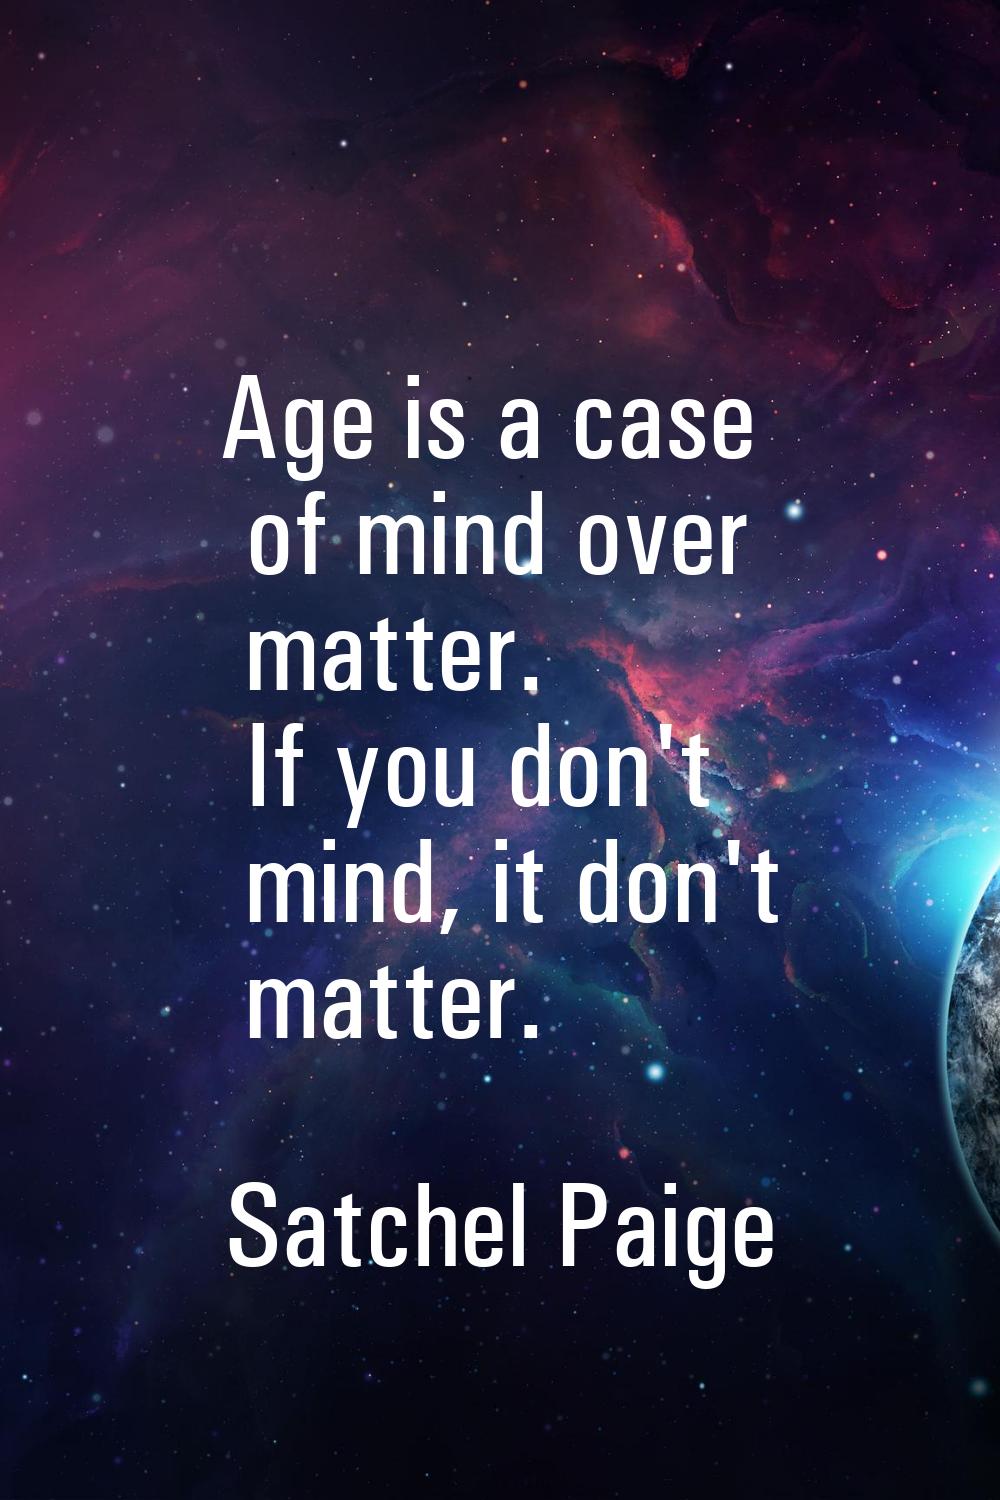 Age is a case of mind over matter. If you don't mind, it don't matter.